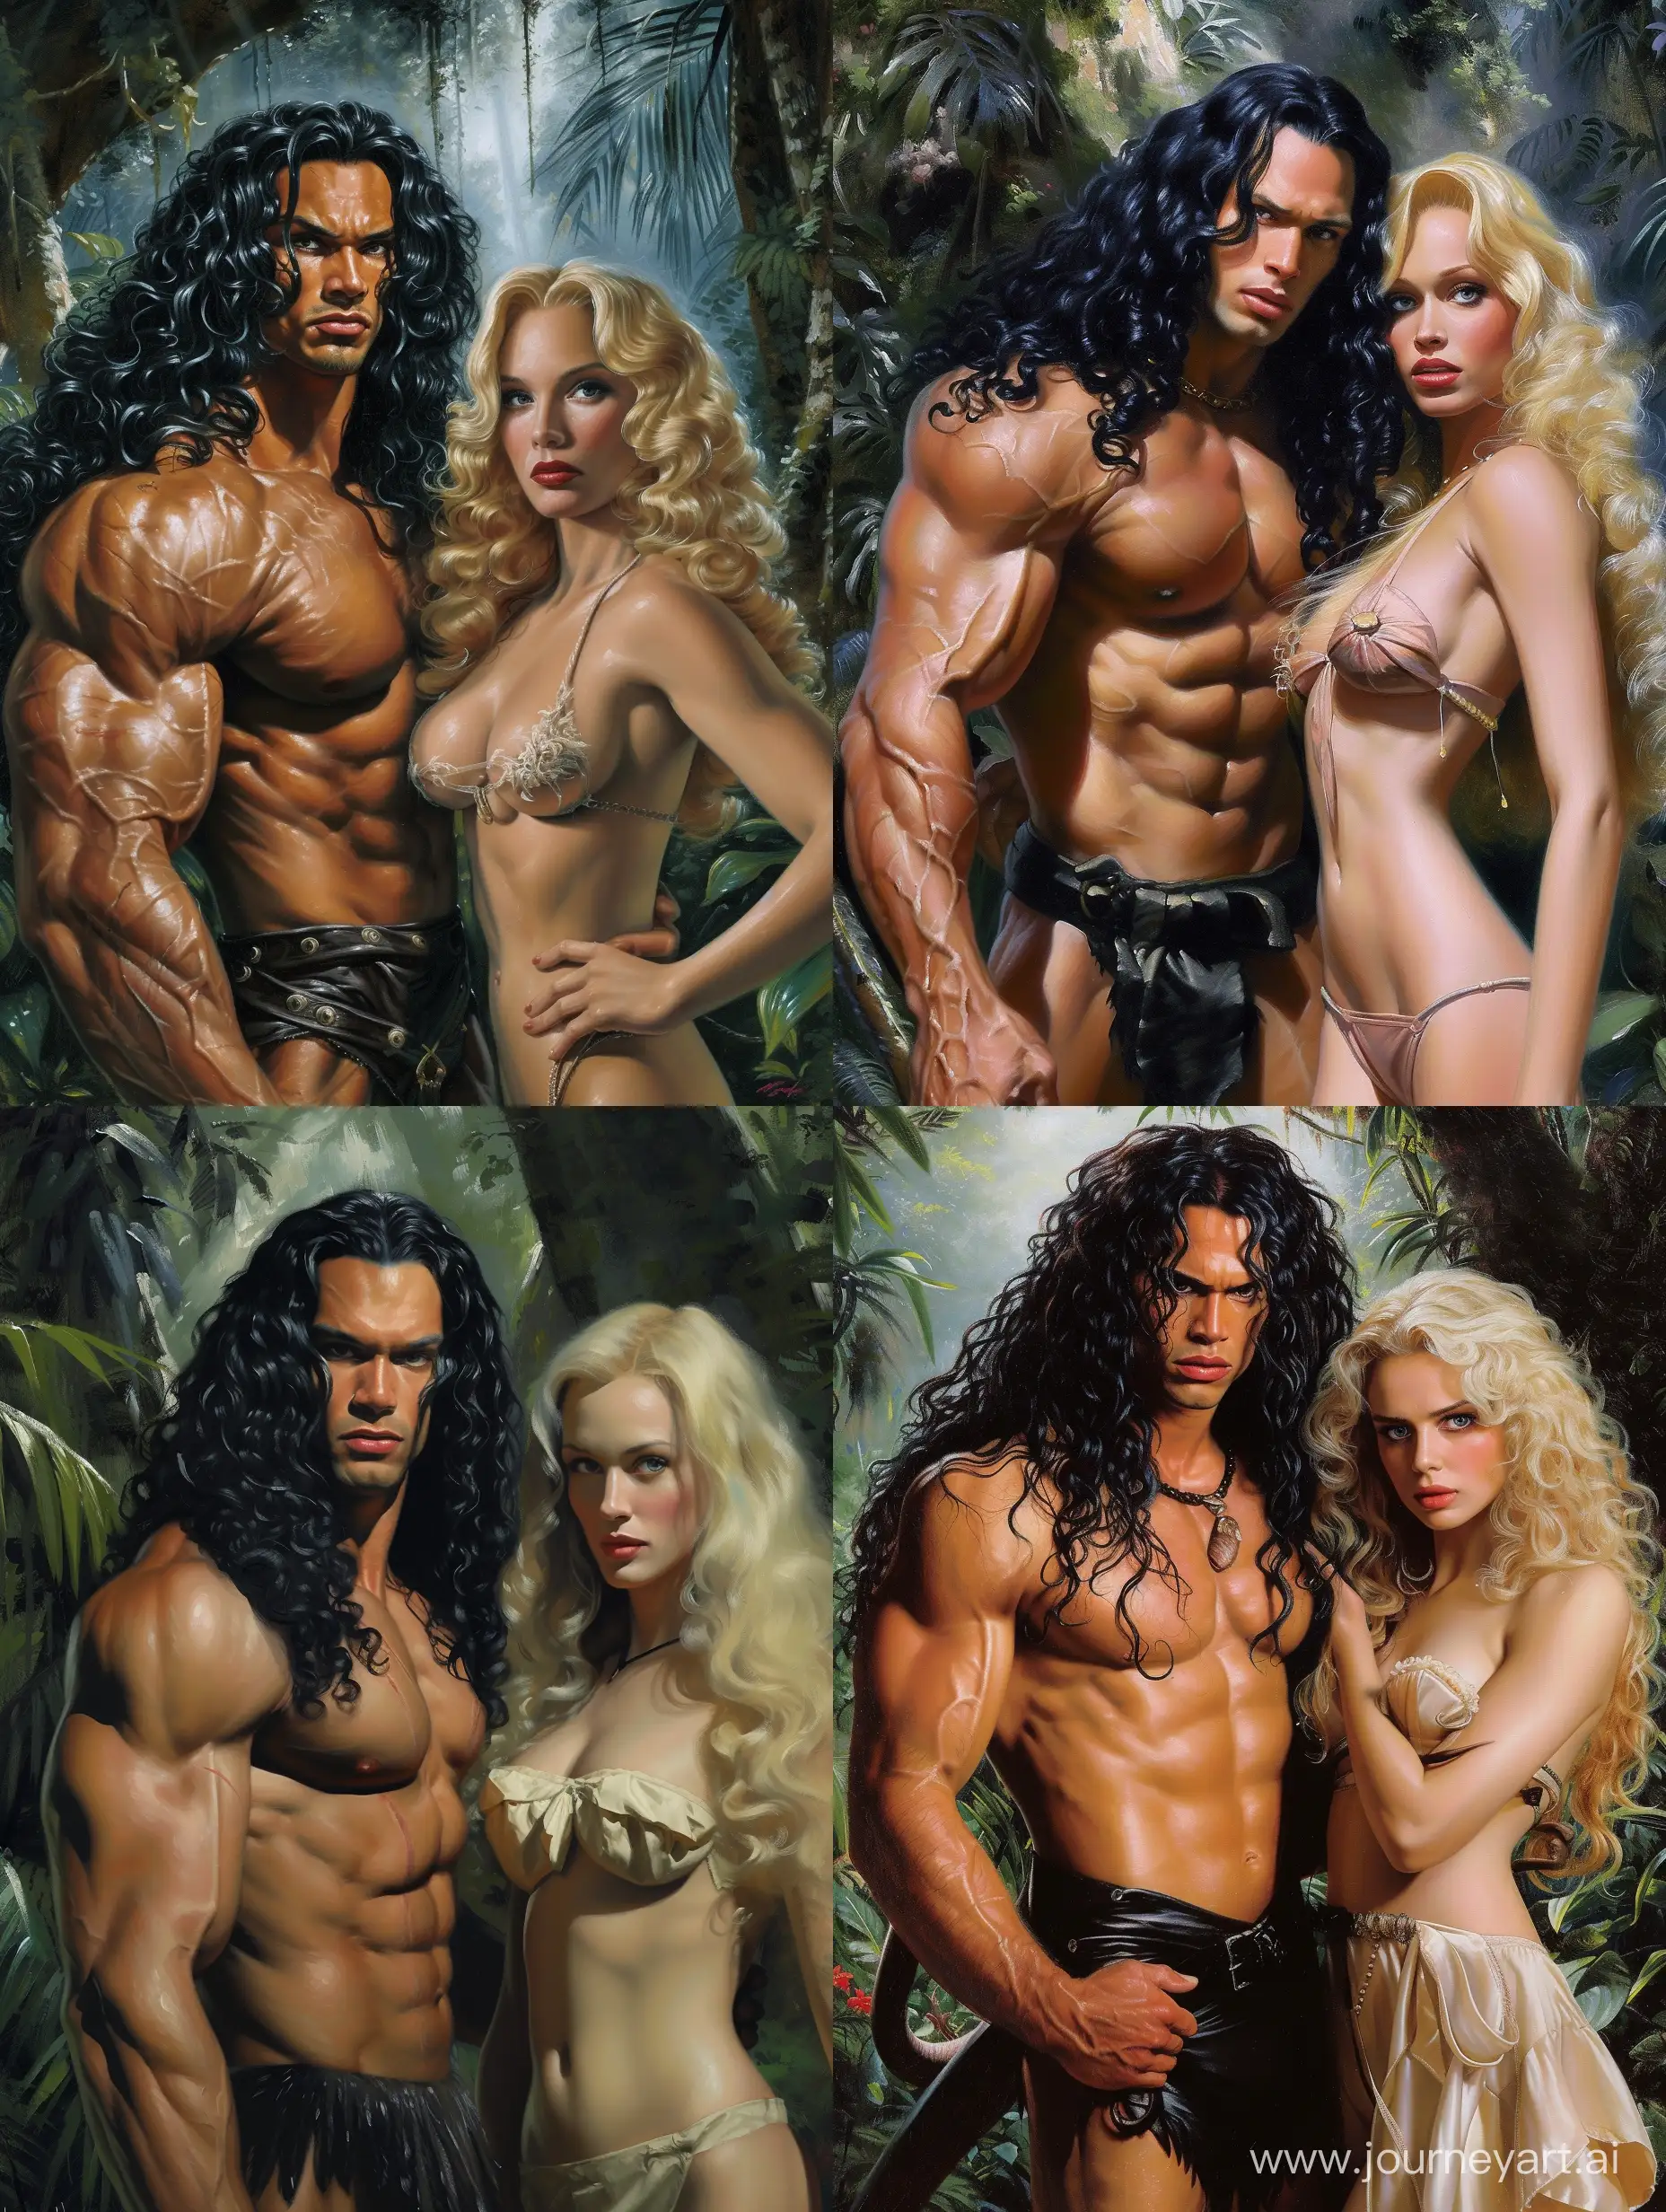 Muscular-Tarzan-and-Blond-Companion-in-Dynamic-Jungle-Scene-VallejoRoyo-Inspired-Oil-Painting